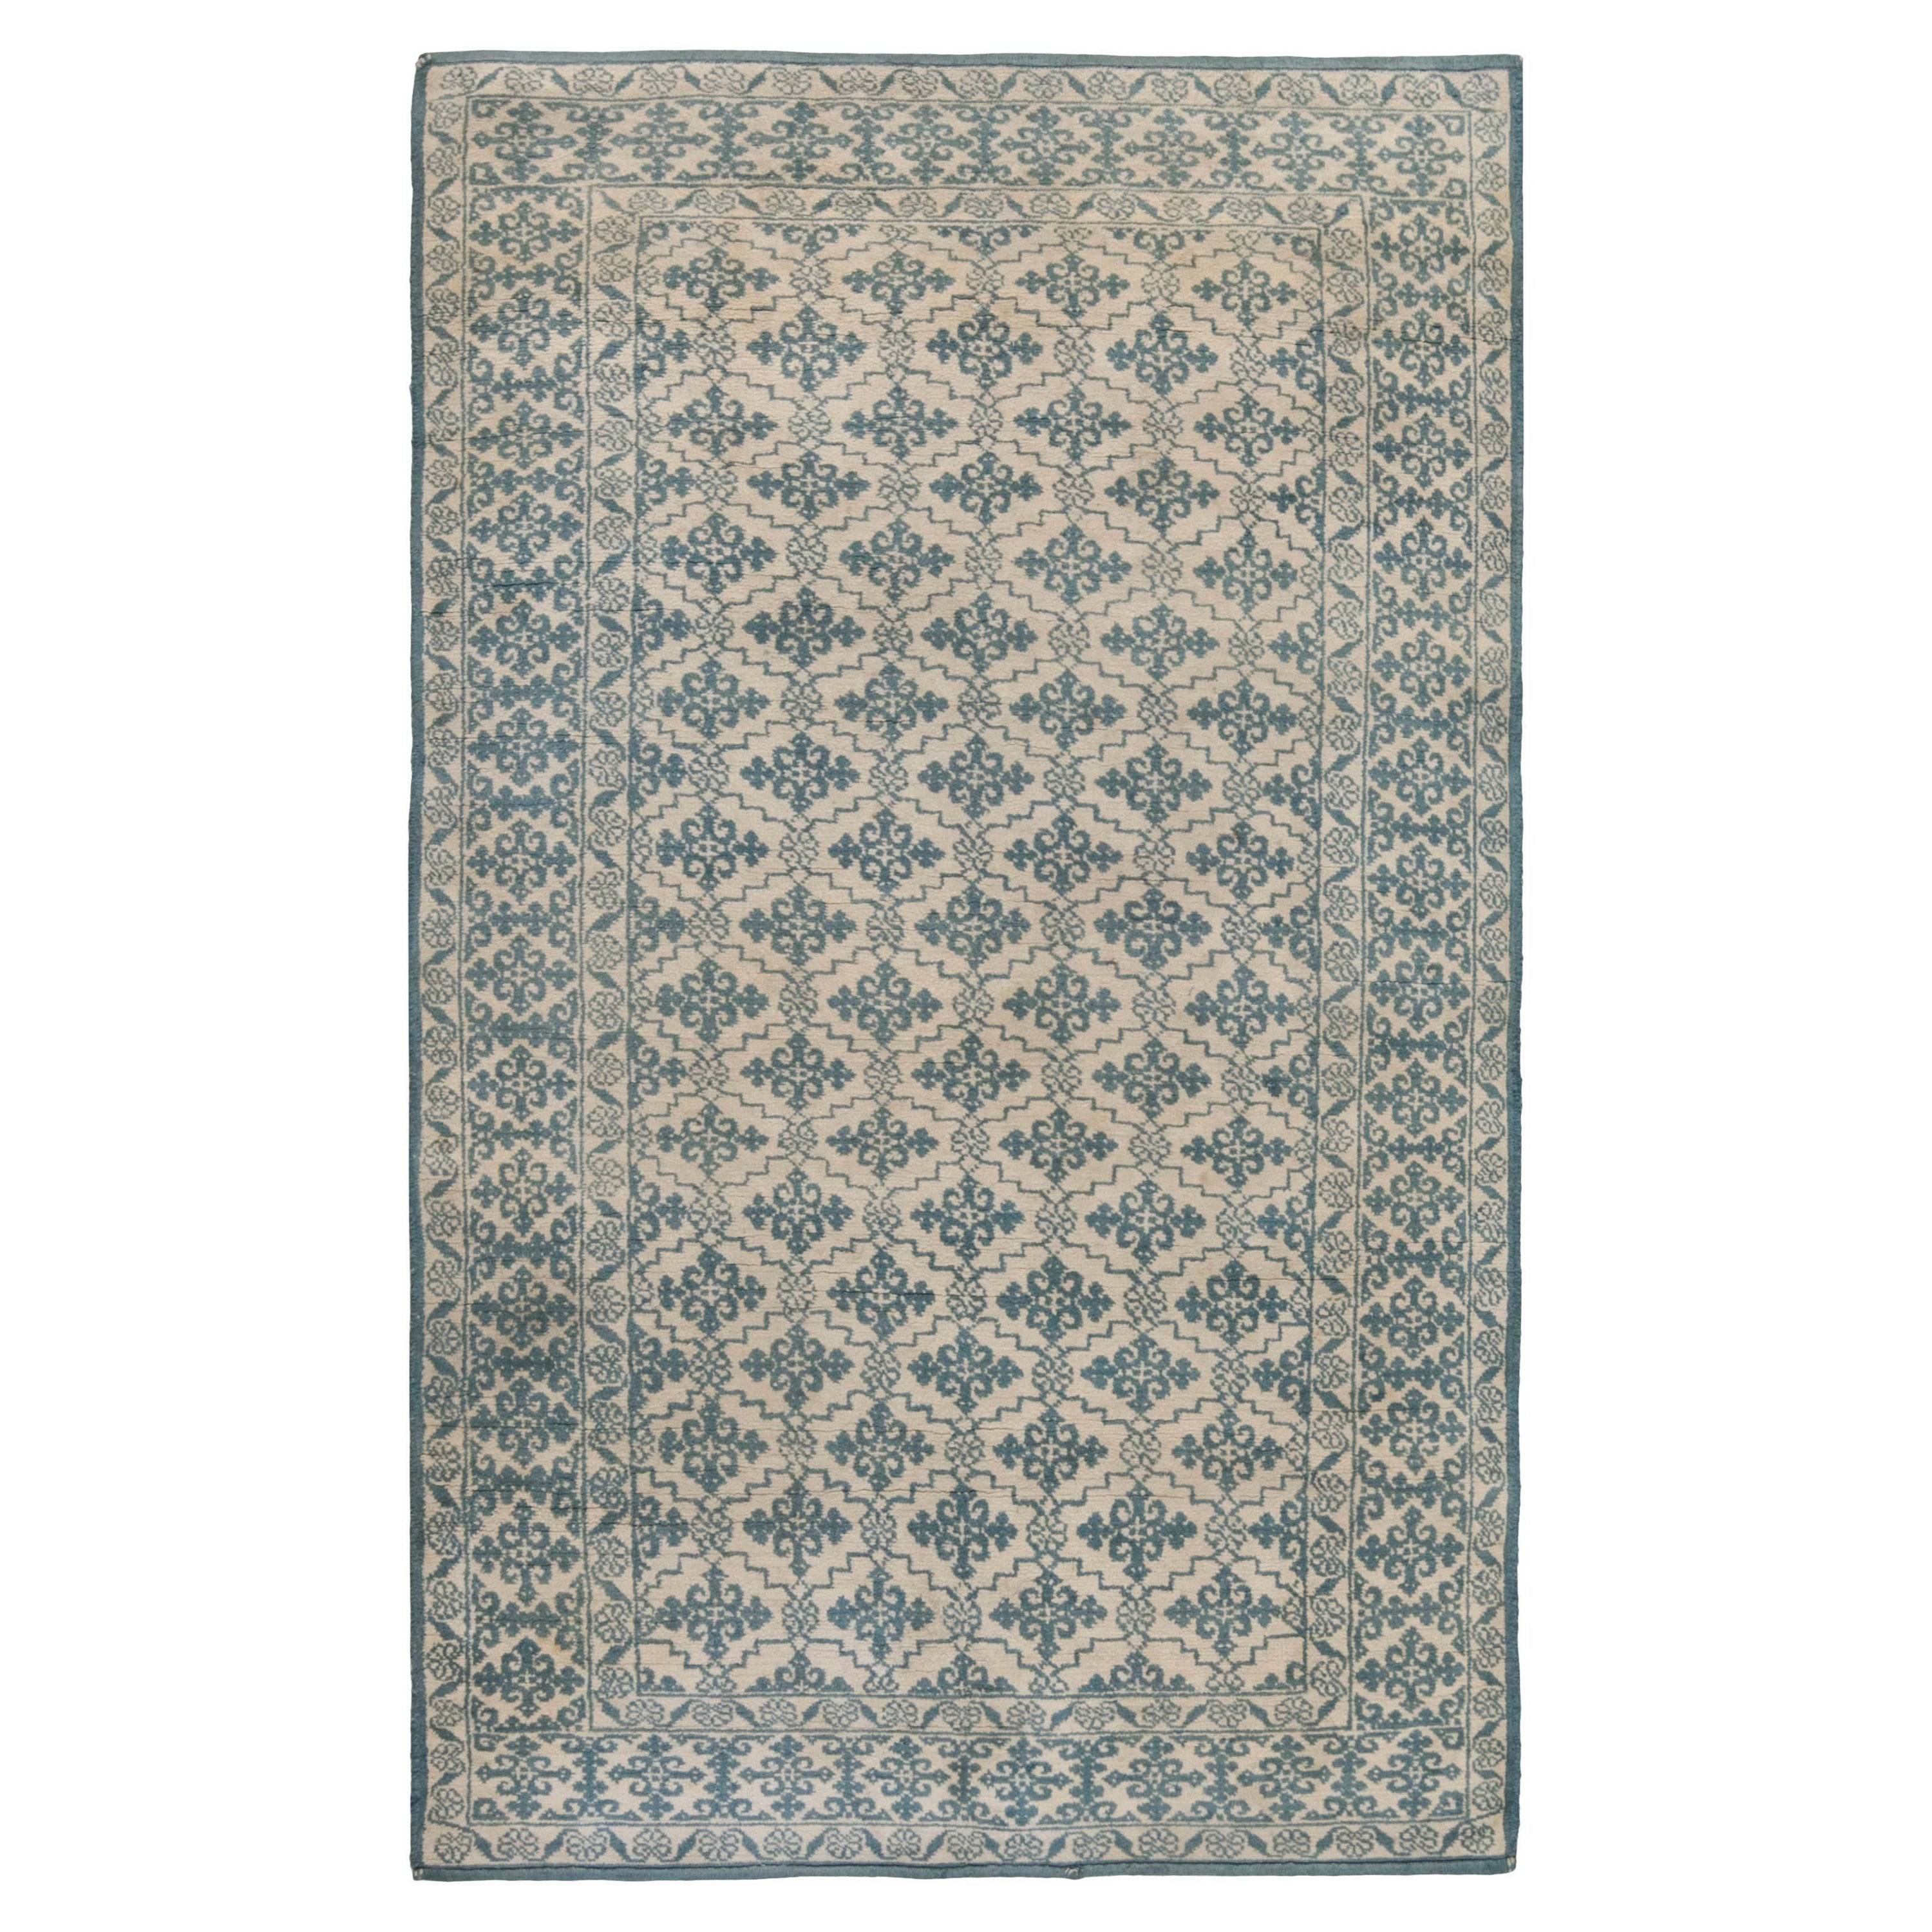 Early 20th Century Indian Agra Blue White Rug